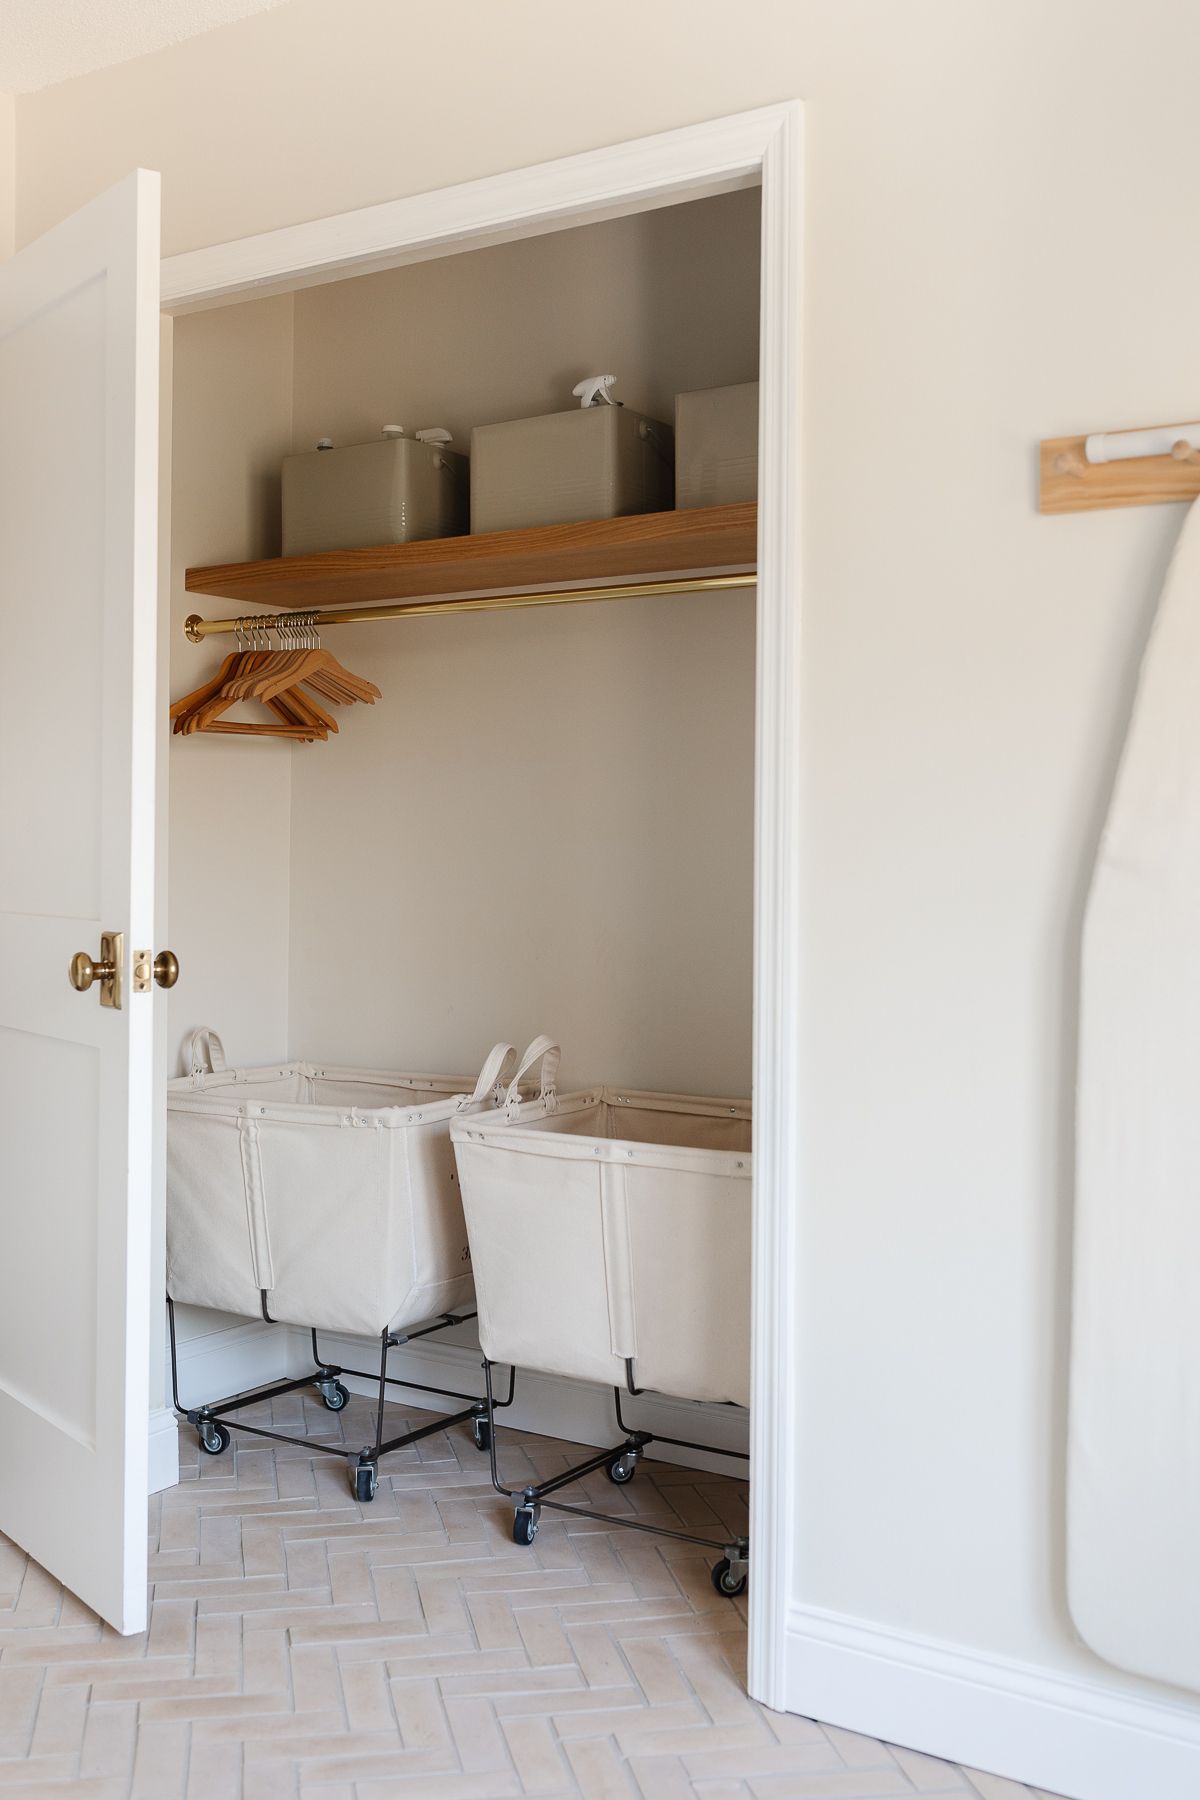 The closet of a modern laundry room with rolling laundry baskets